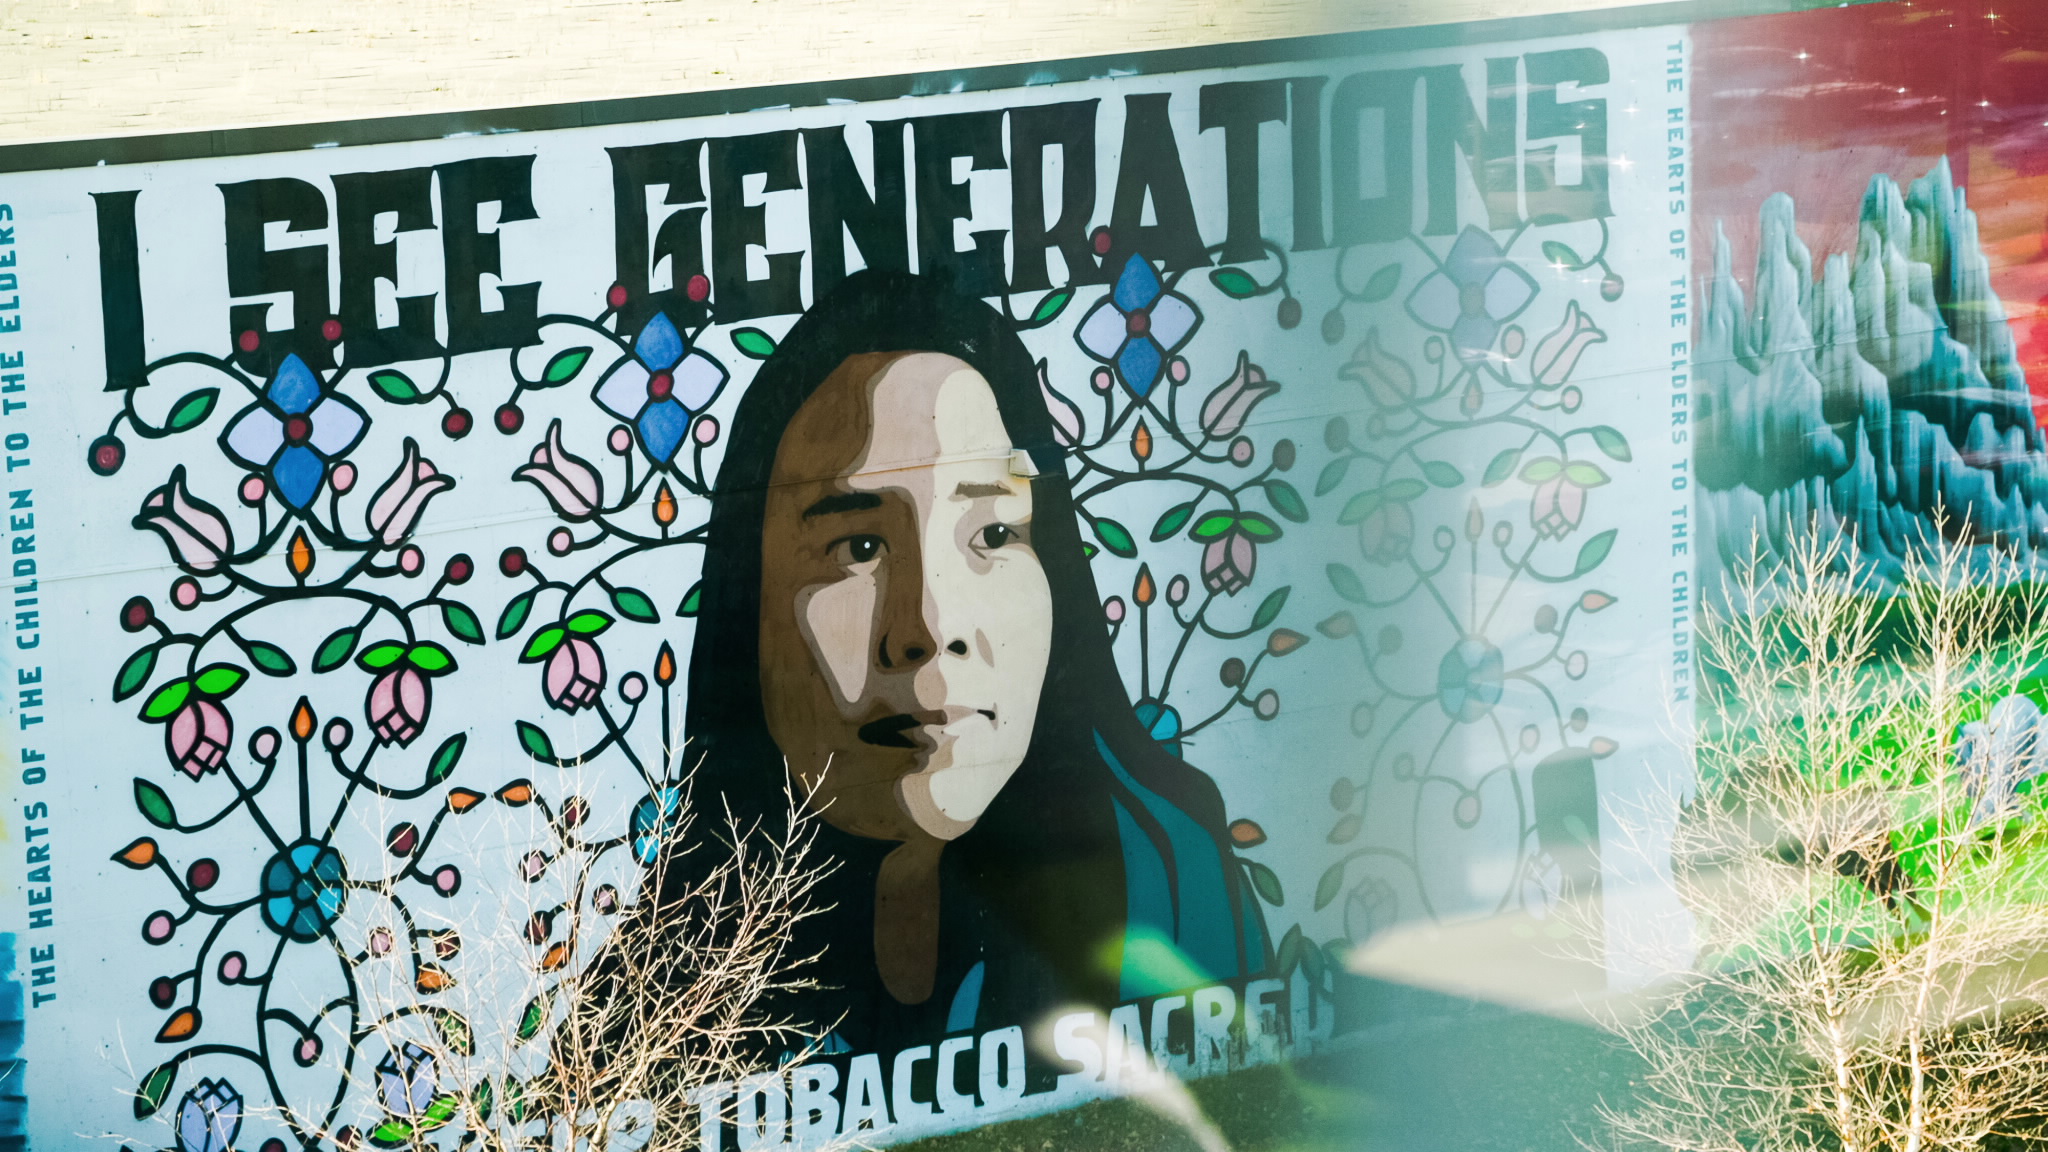 Community mural with a girl, flowers, and text, " I see generations. the heats of the elders to the children".